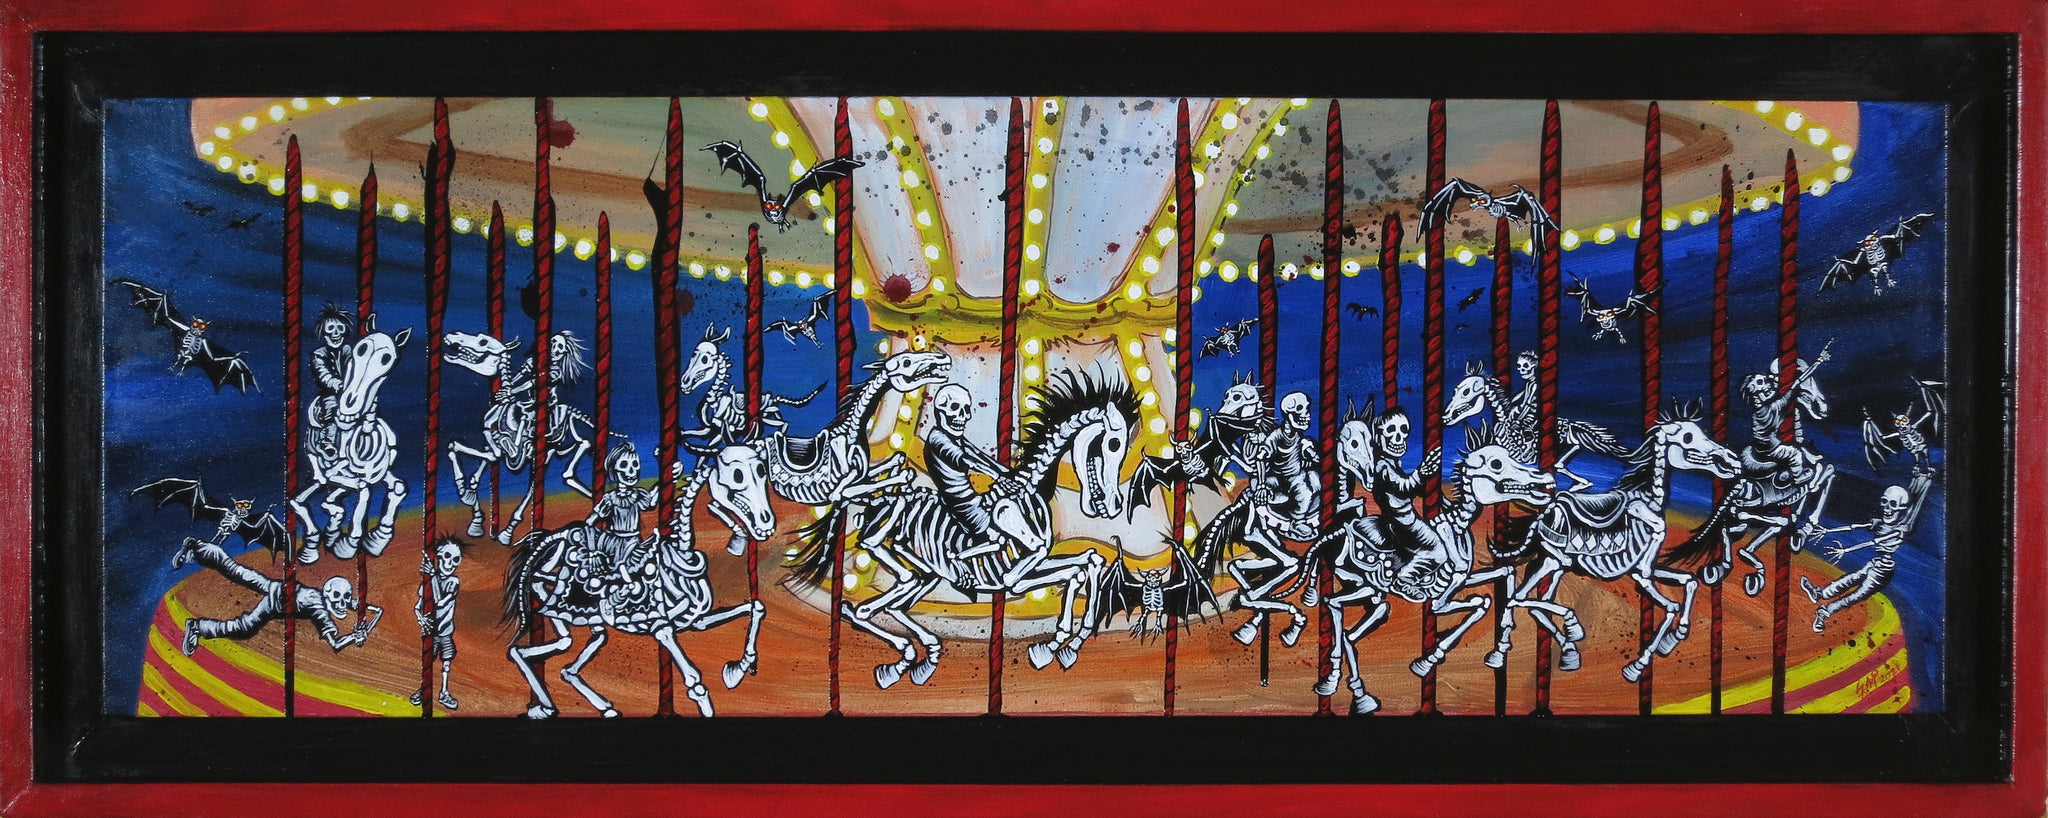 Bats Attack the Carousel - Canvas Print